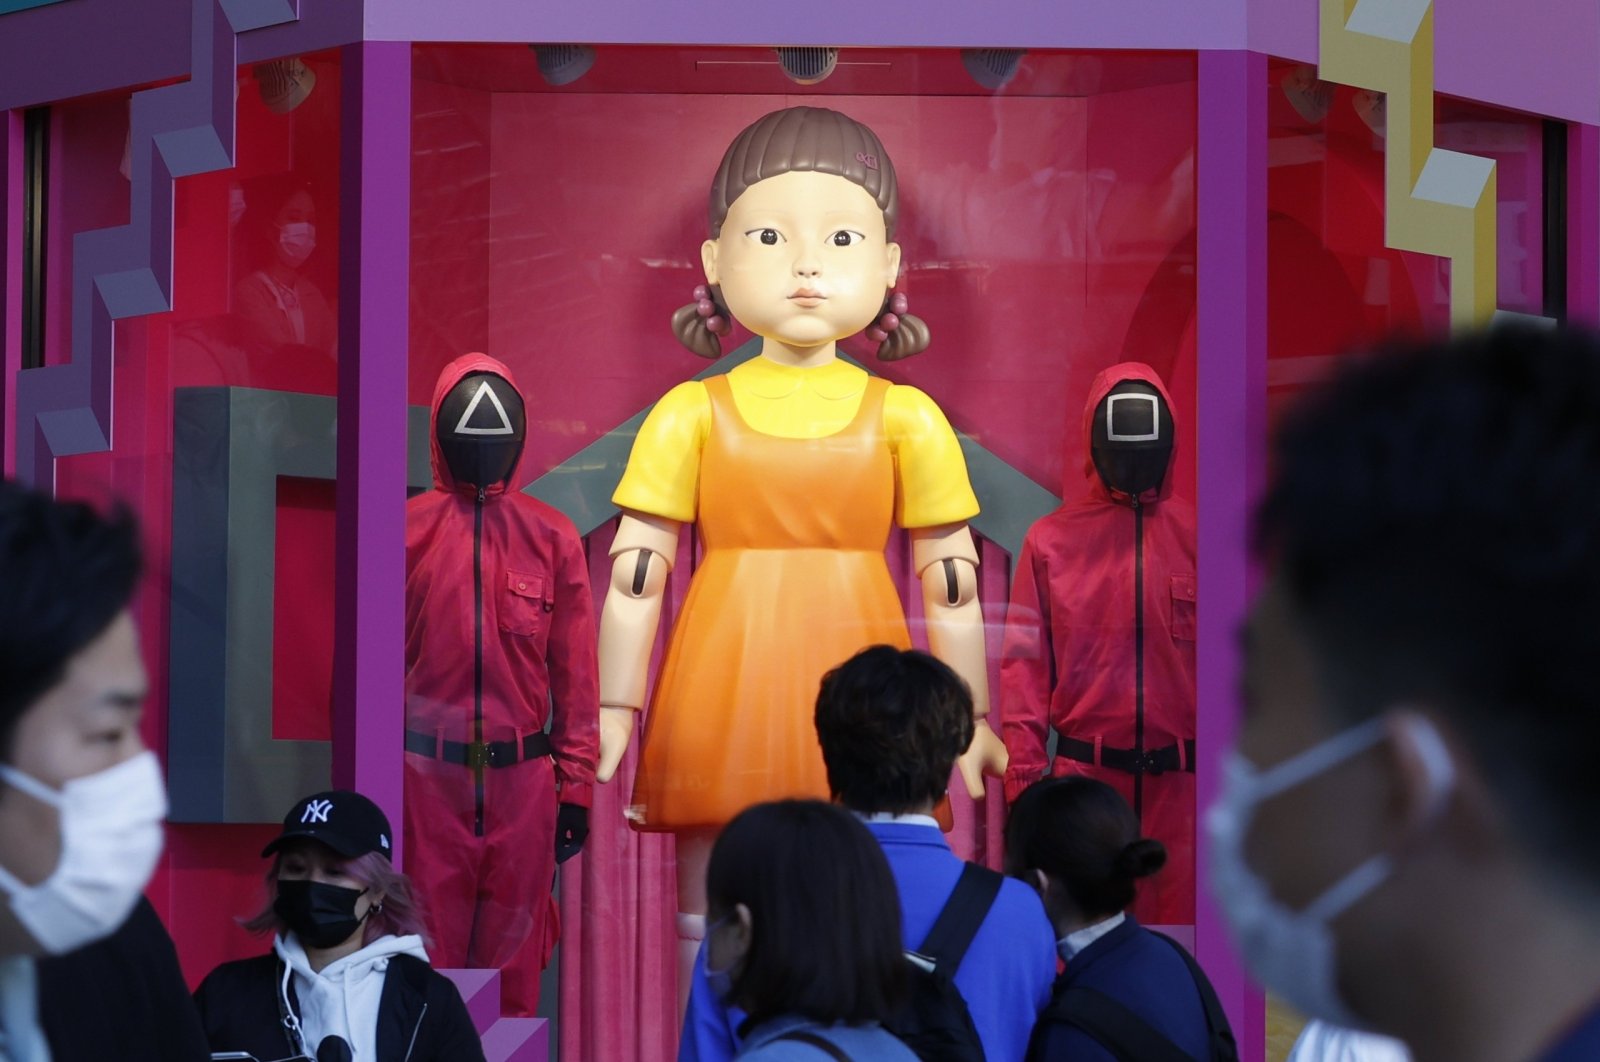 Replica of the Younghee doll from the Netflix series &quot;Squid Game.&quot; (DPA Photo)